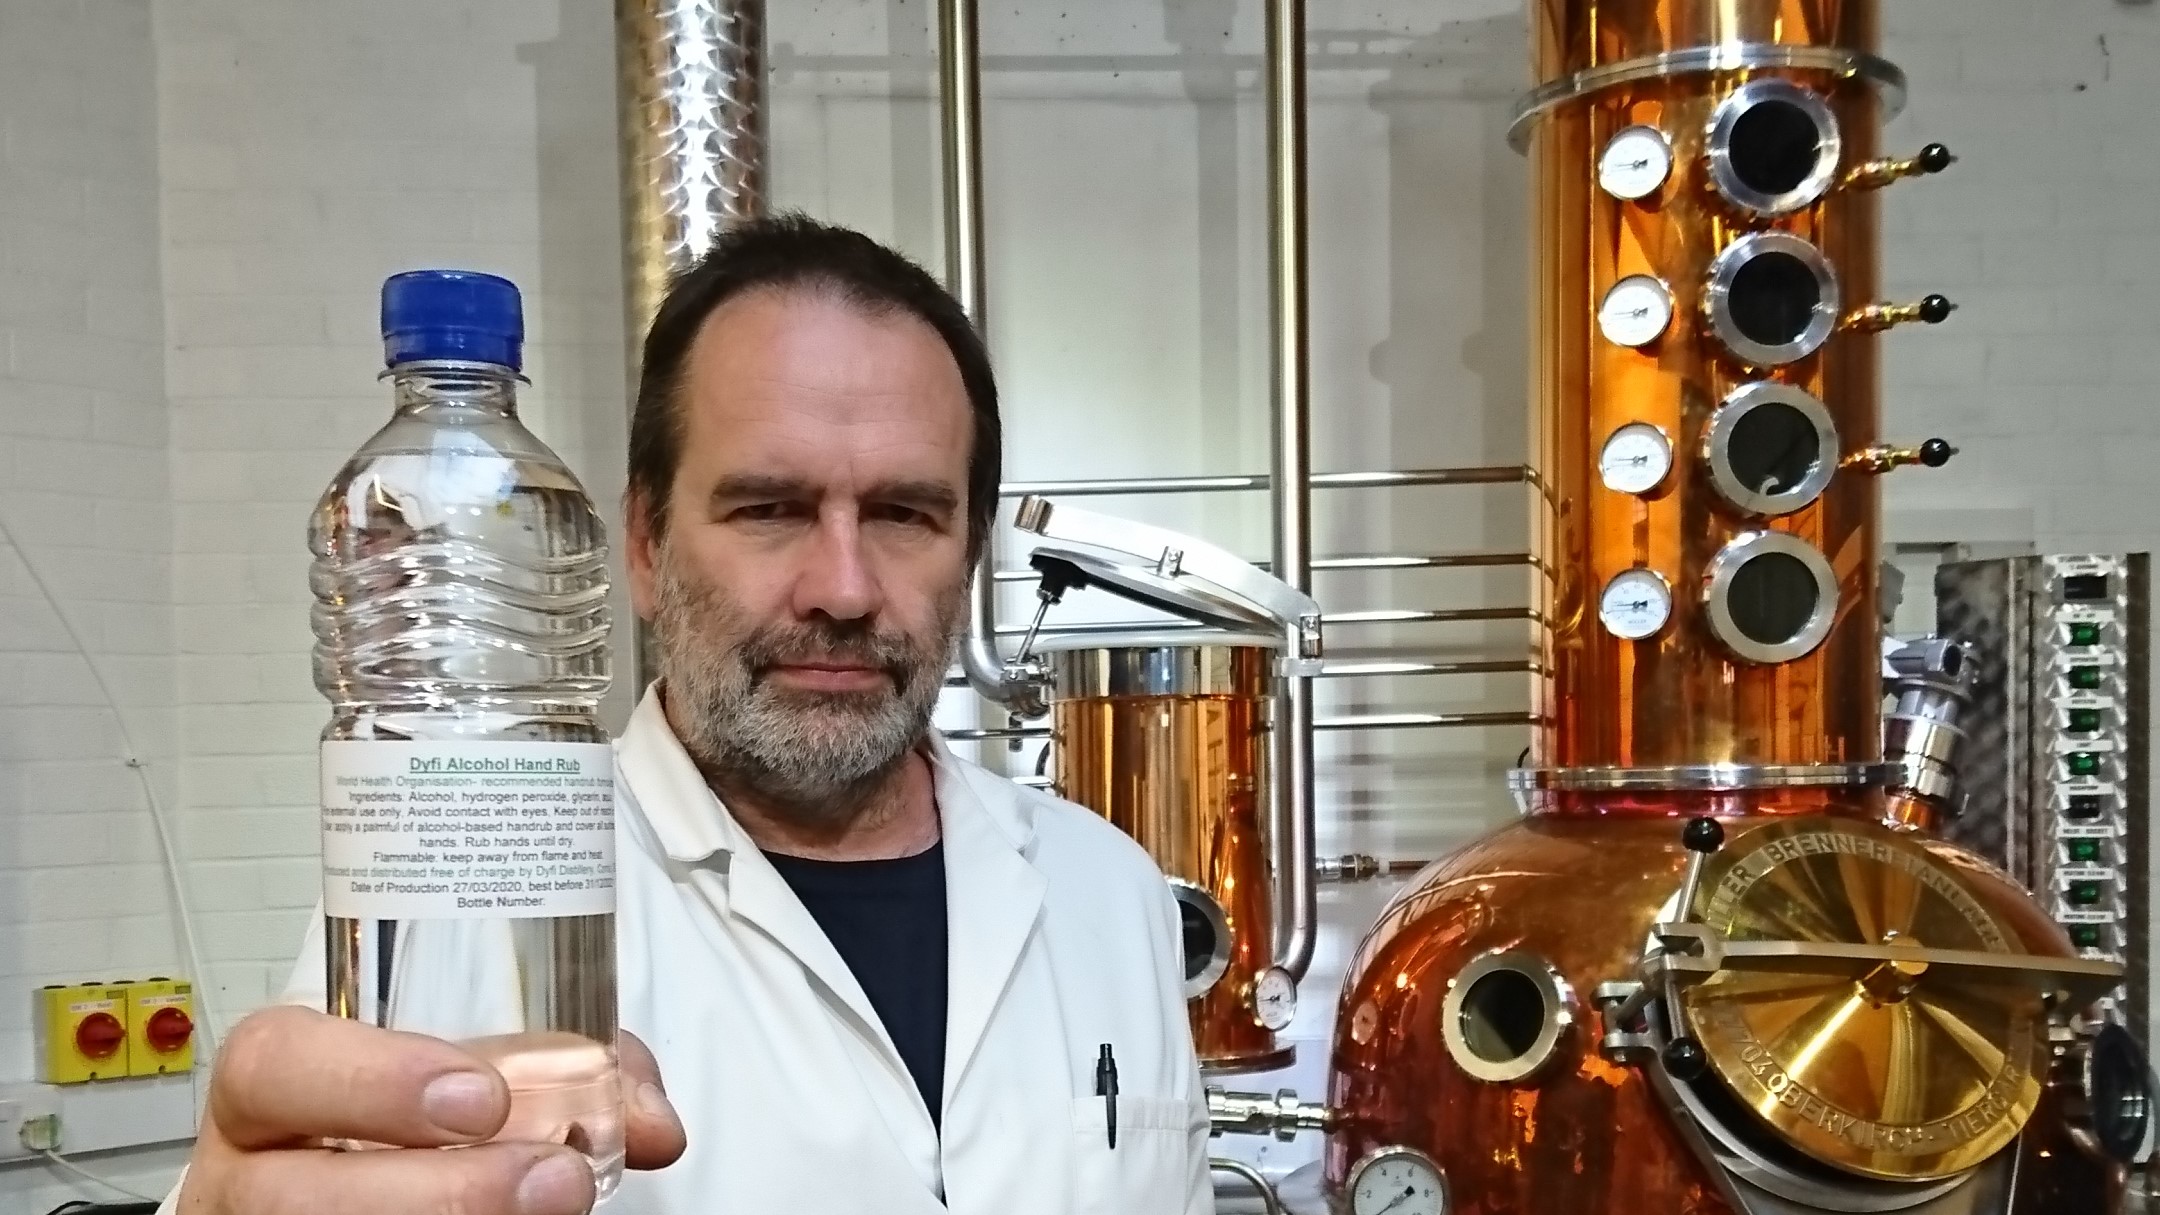 Man holding bottle of alcohol in front of distillery